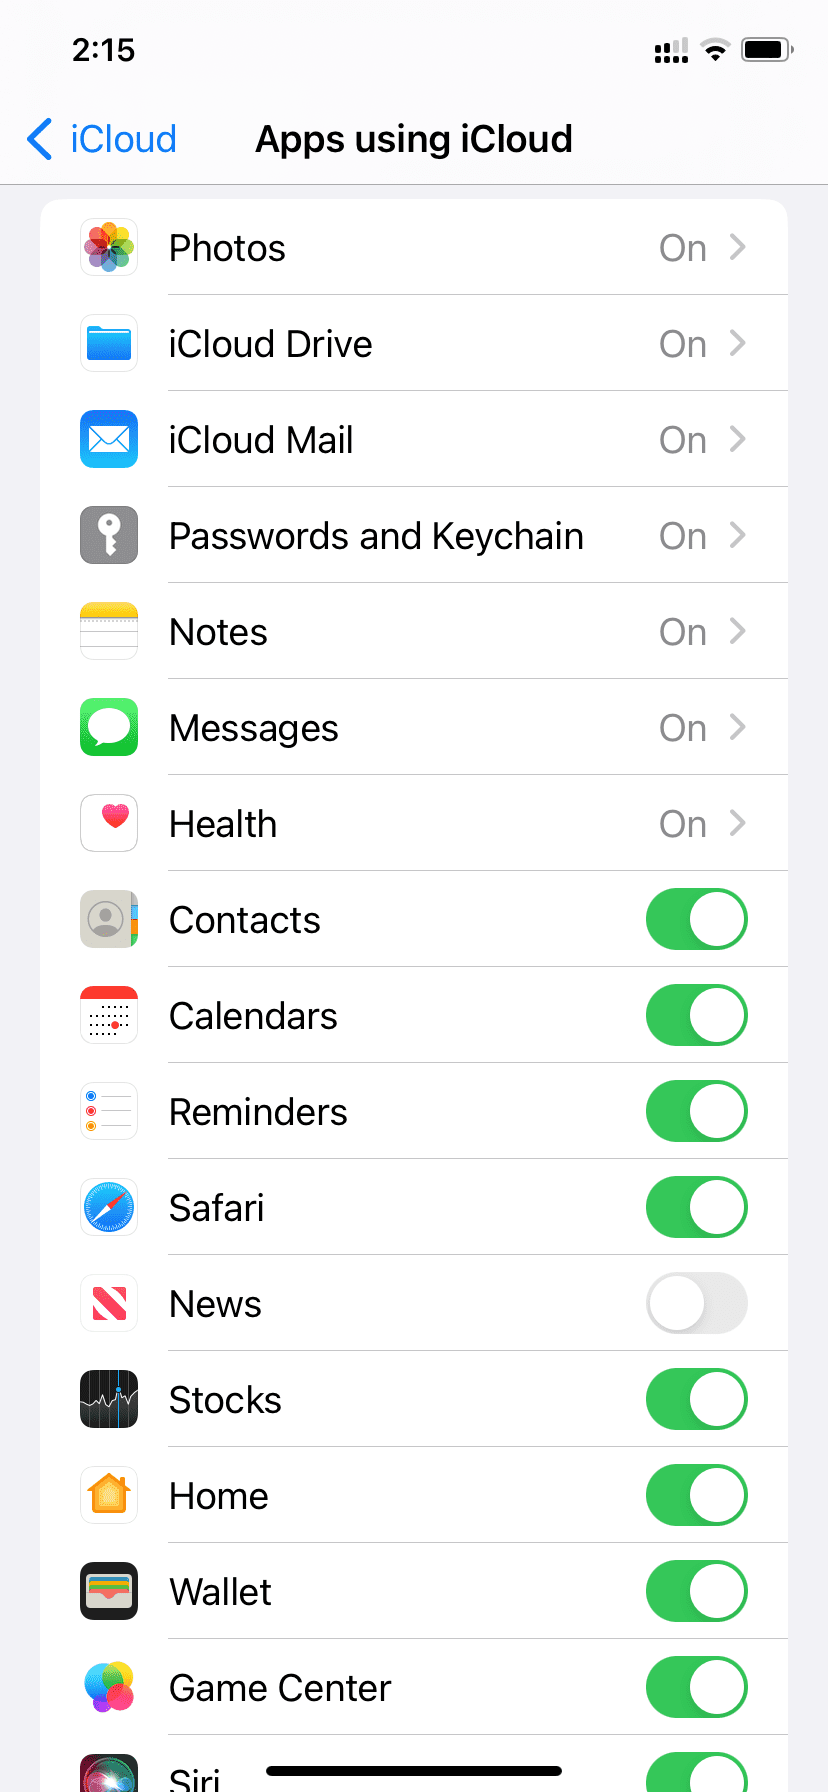 Apps using iCloud on iPhone